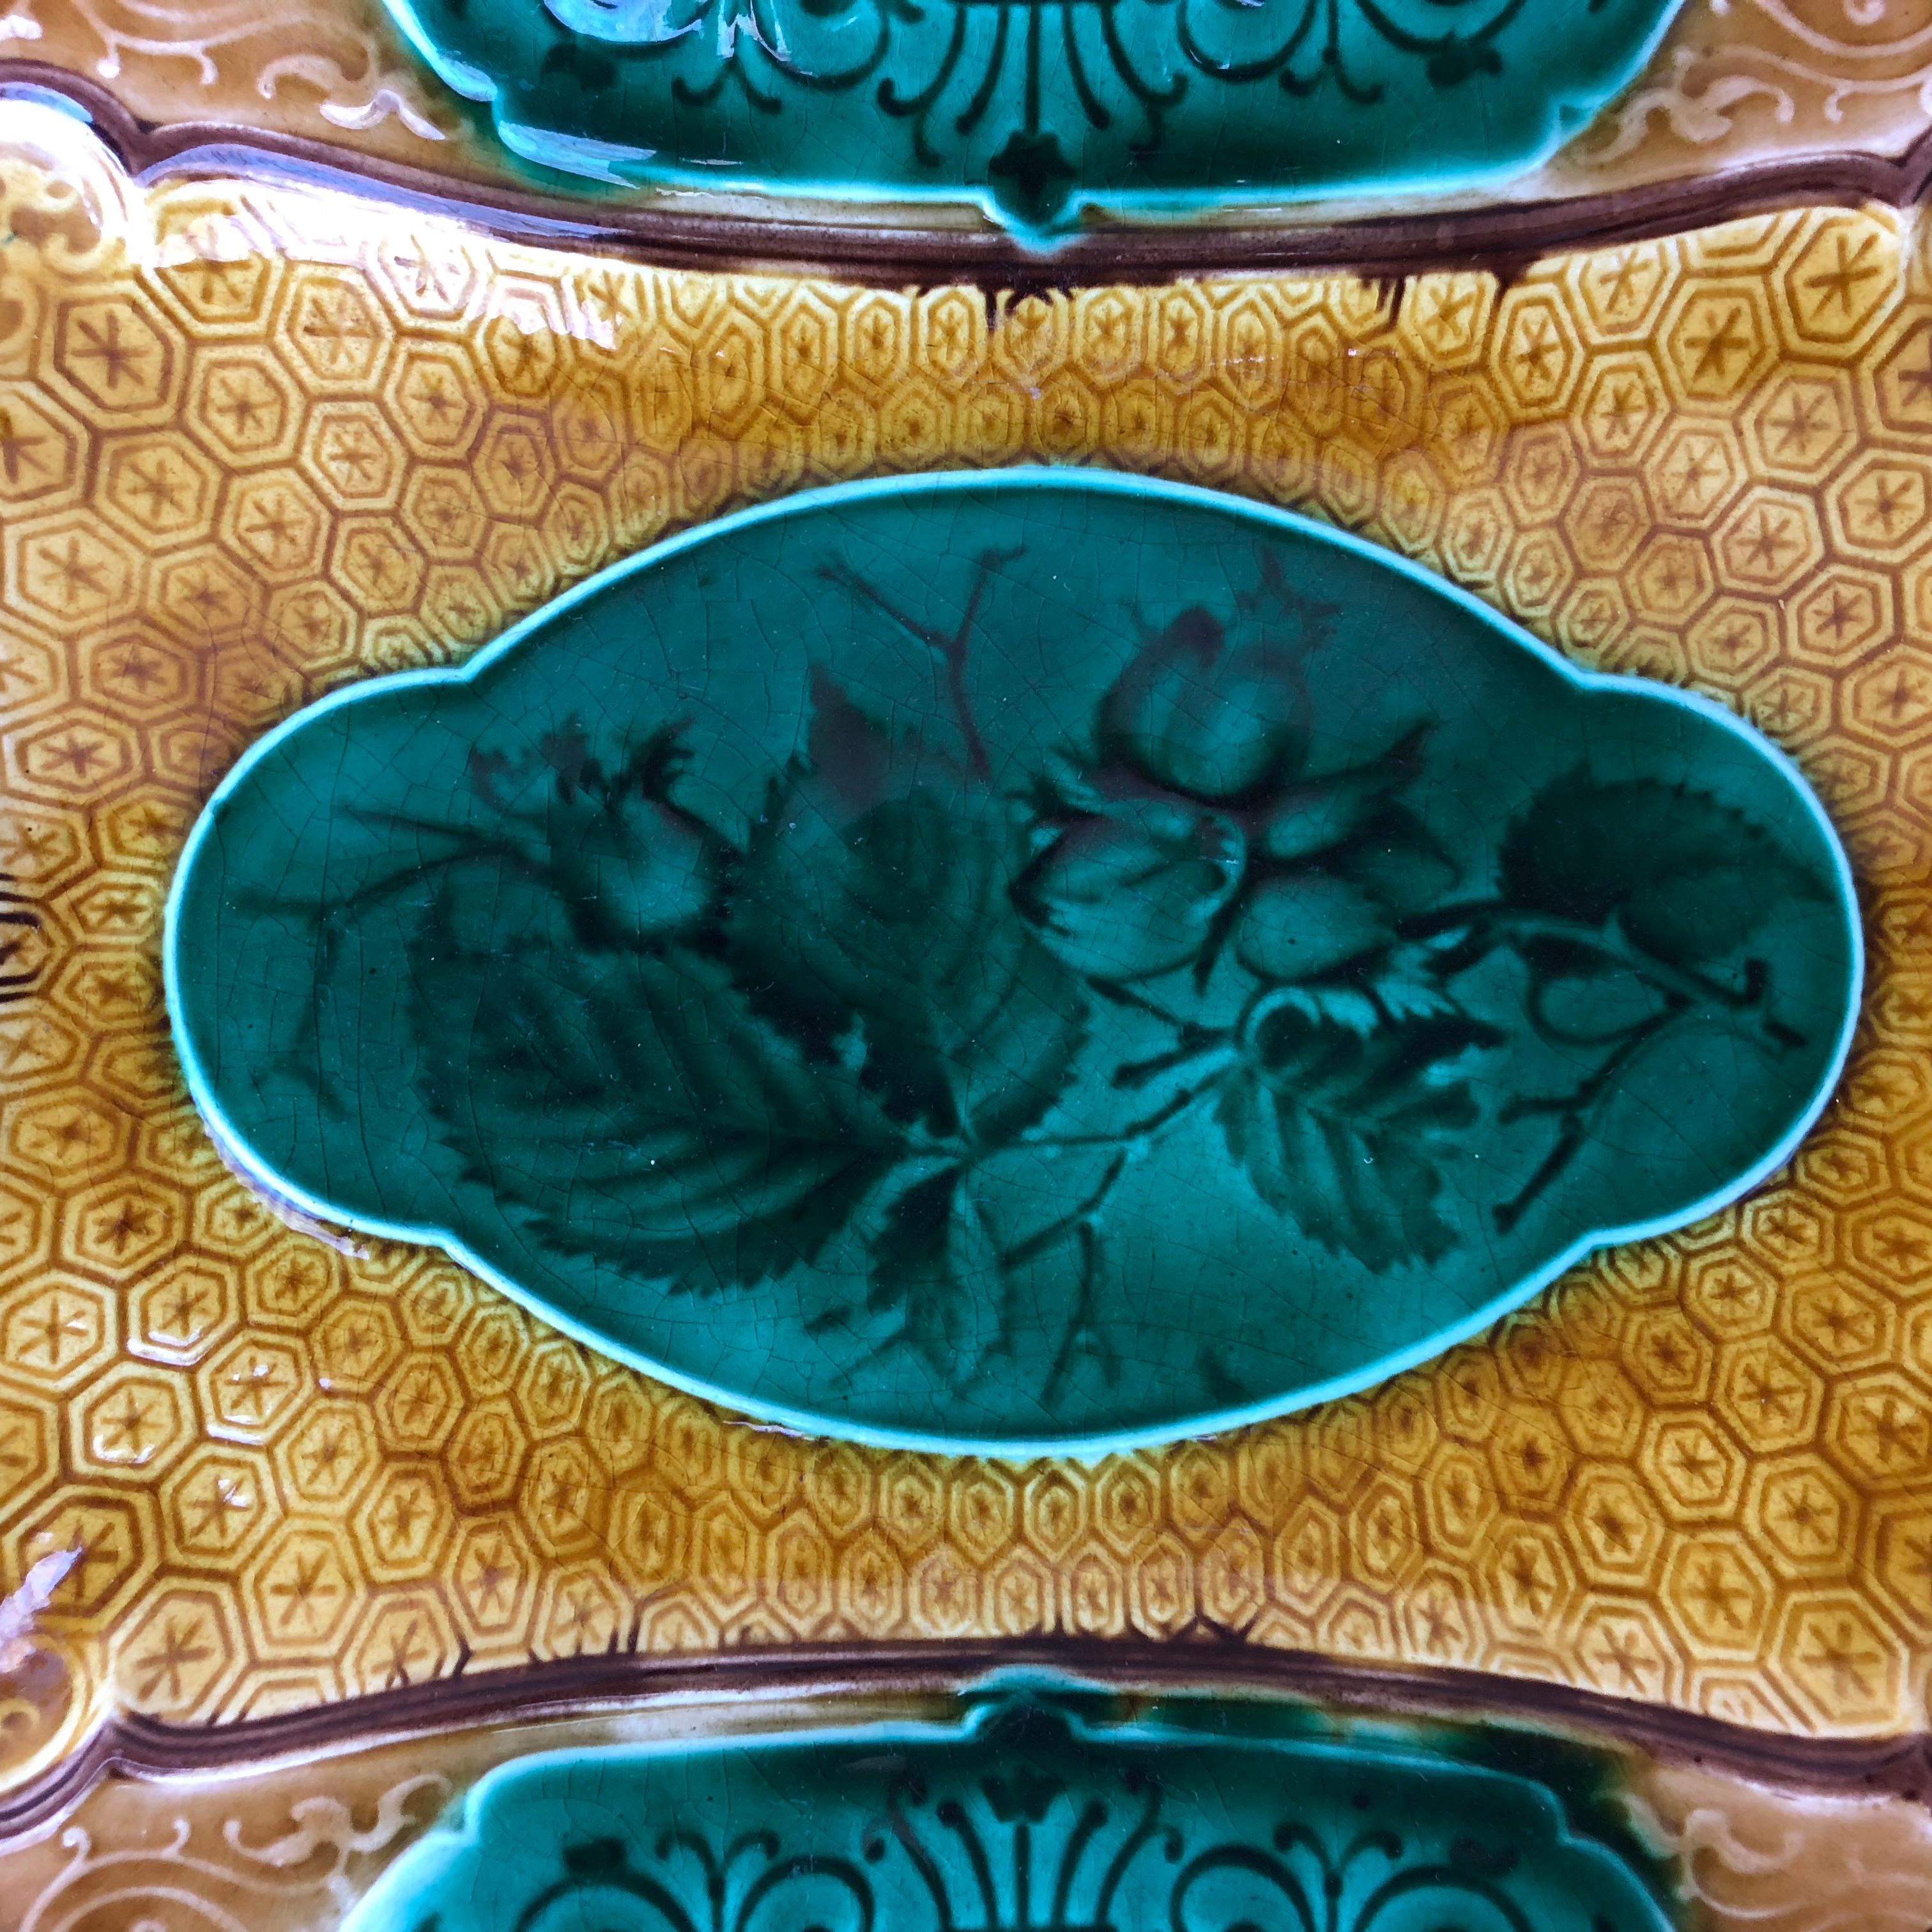 Large Majolica rectangular platter decorated with geometric pattern around a central cartouche with hazelnuts signed Sarreguemines Majolica, circa 1870.